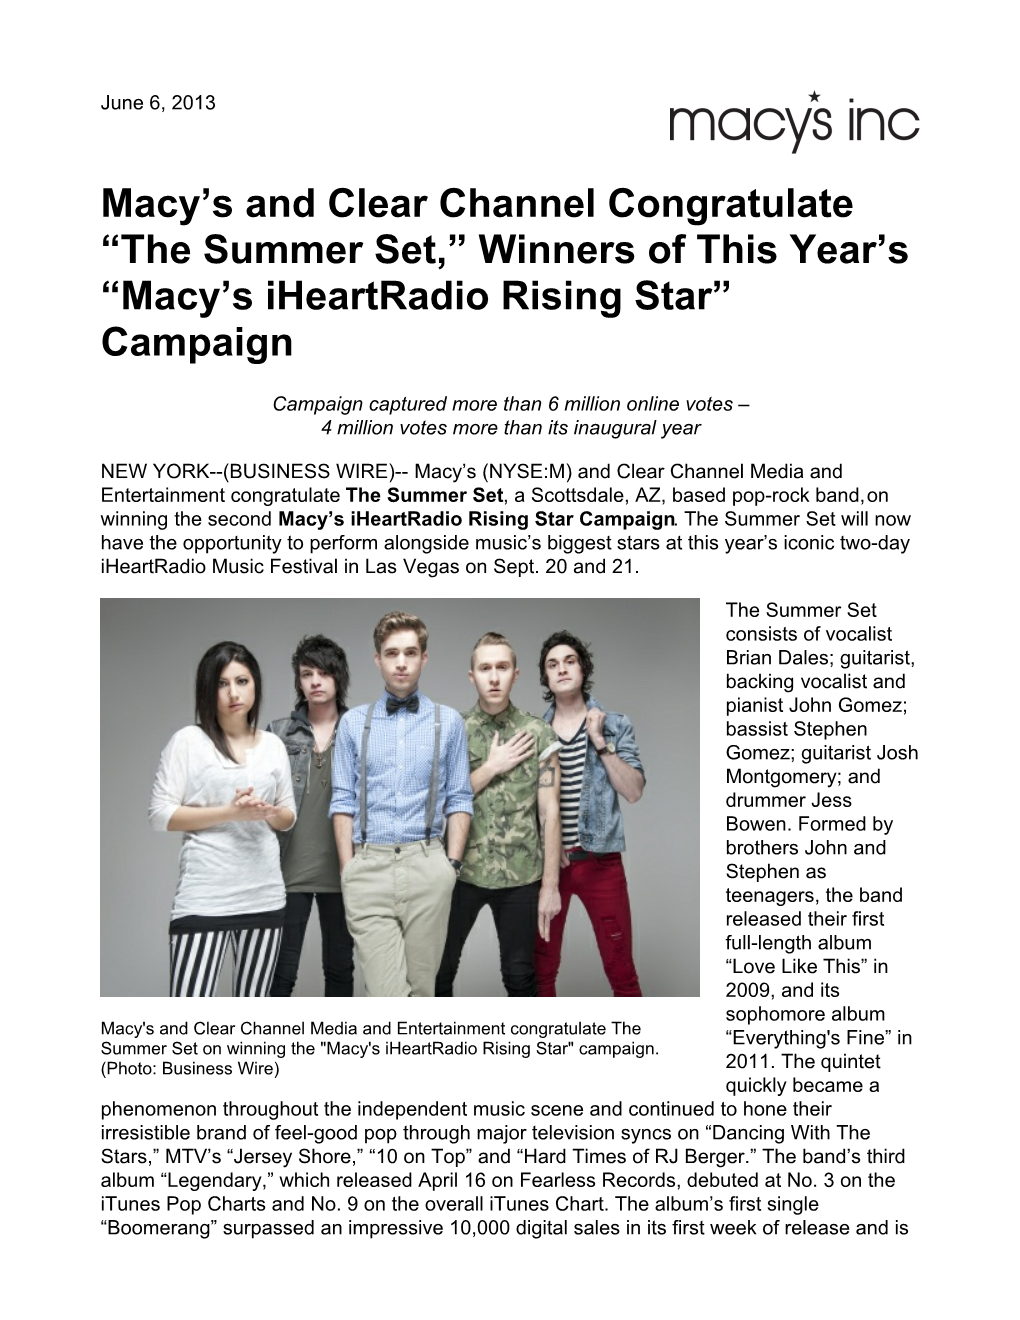 Macy's and Clear Channel Congratulate “The